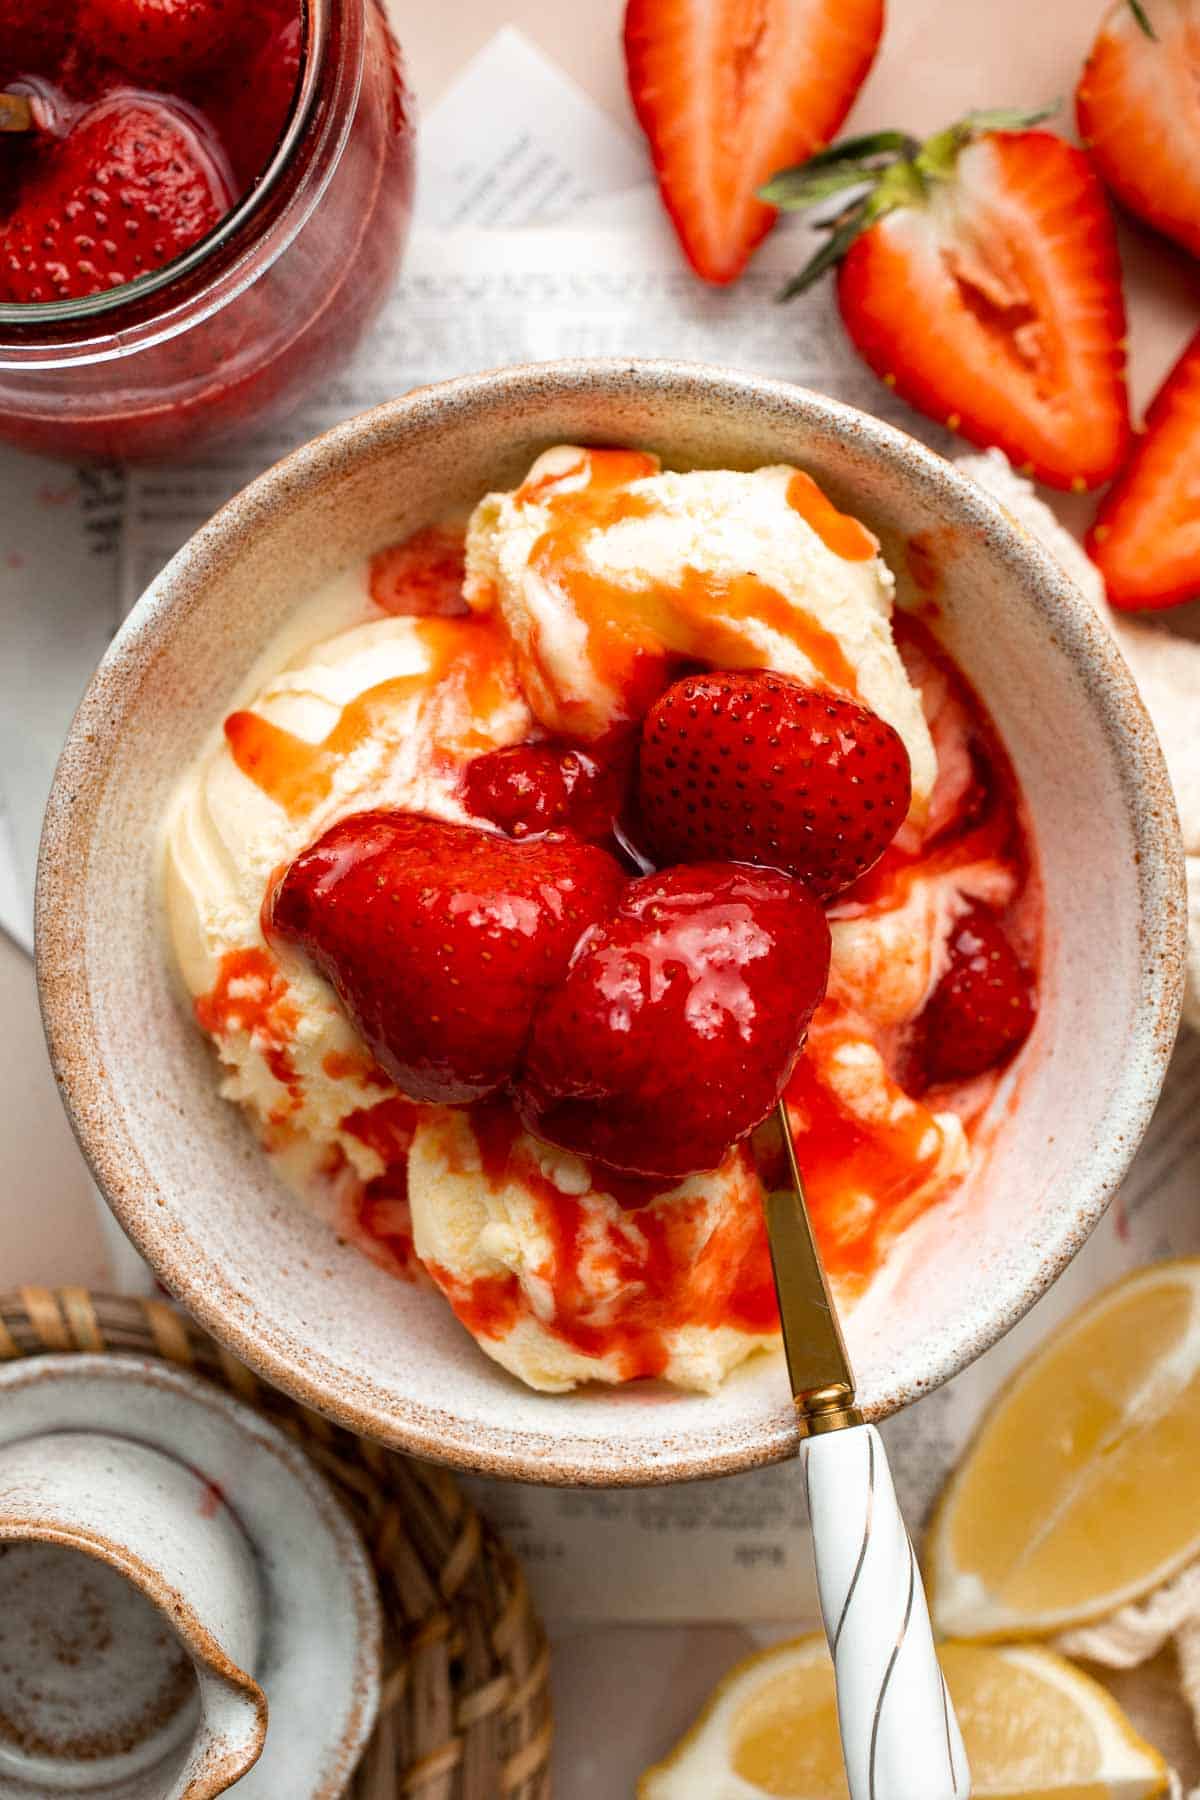 Strawberry Compote transforms strawberries into jammy, syrupy, sweet preserves that you can use in so many different ways. Make with 3 simple ingredients! | aheadofthyme.com